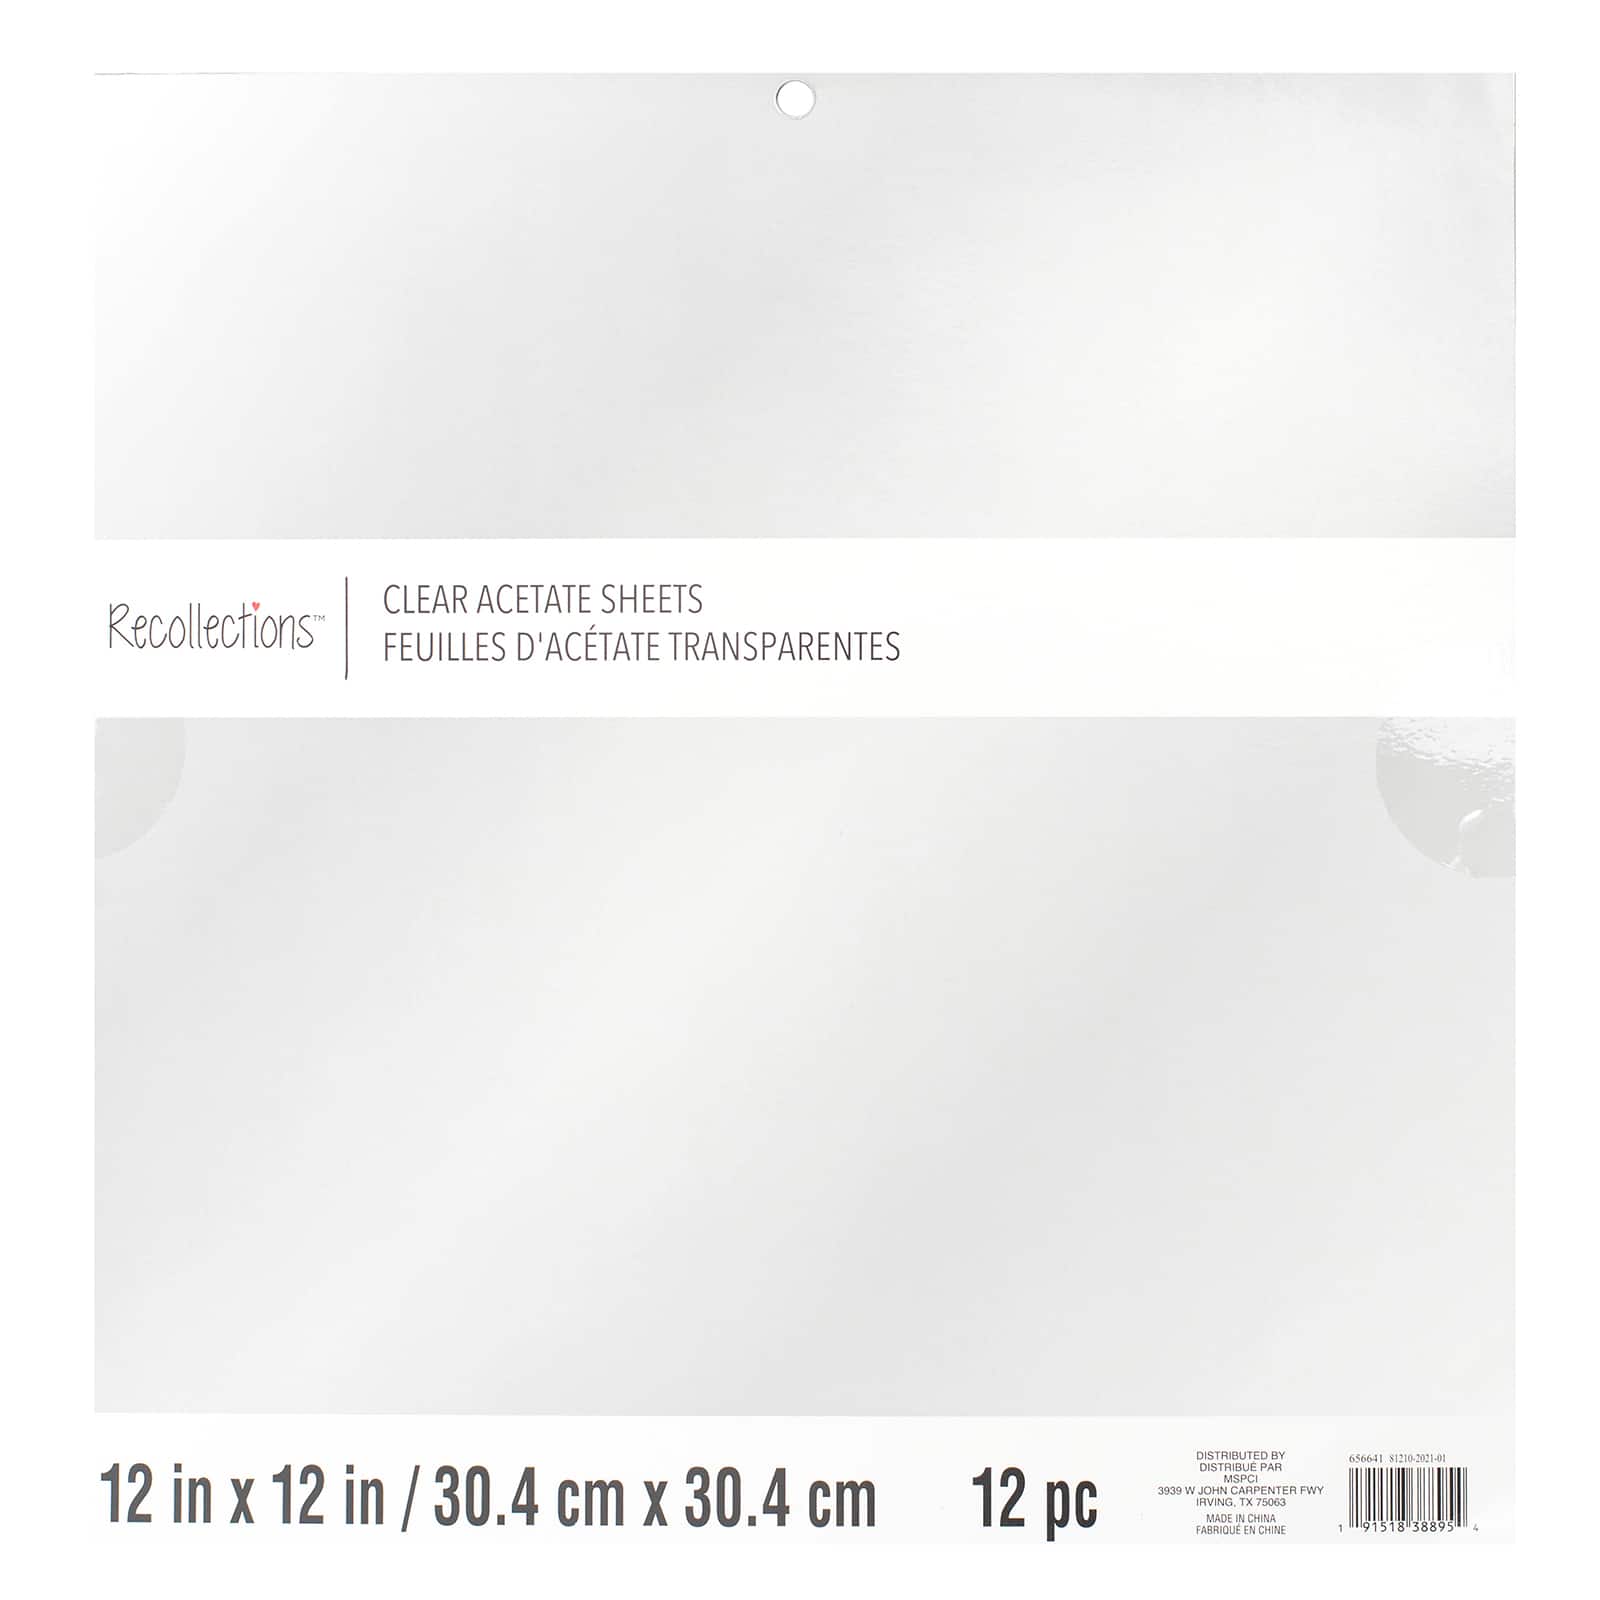 Primary Acetate Sheets, 50ct. by Creatology™